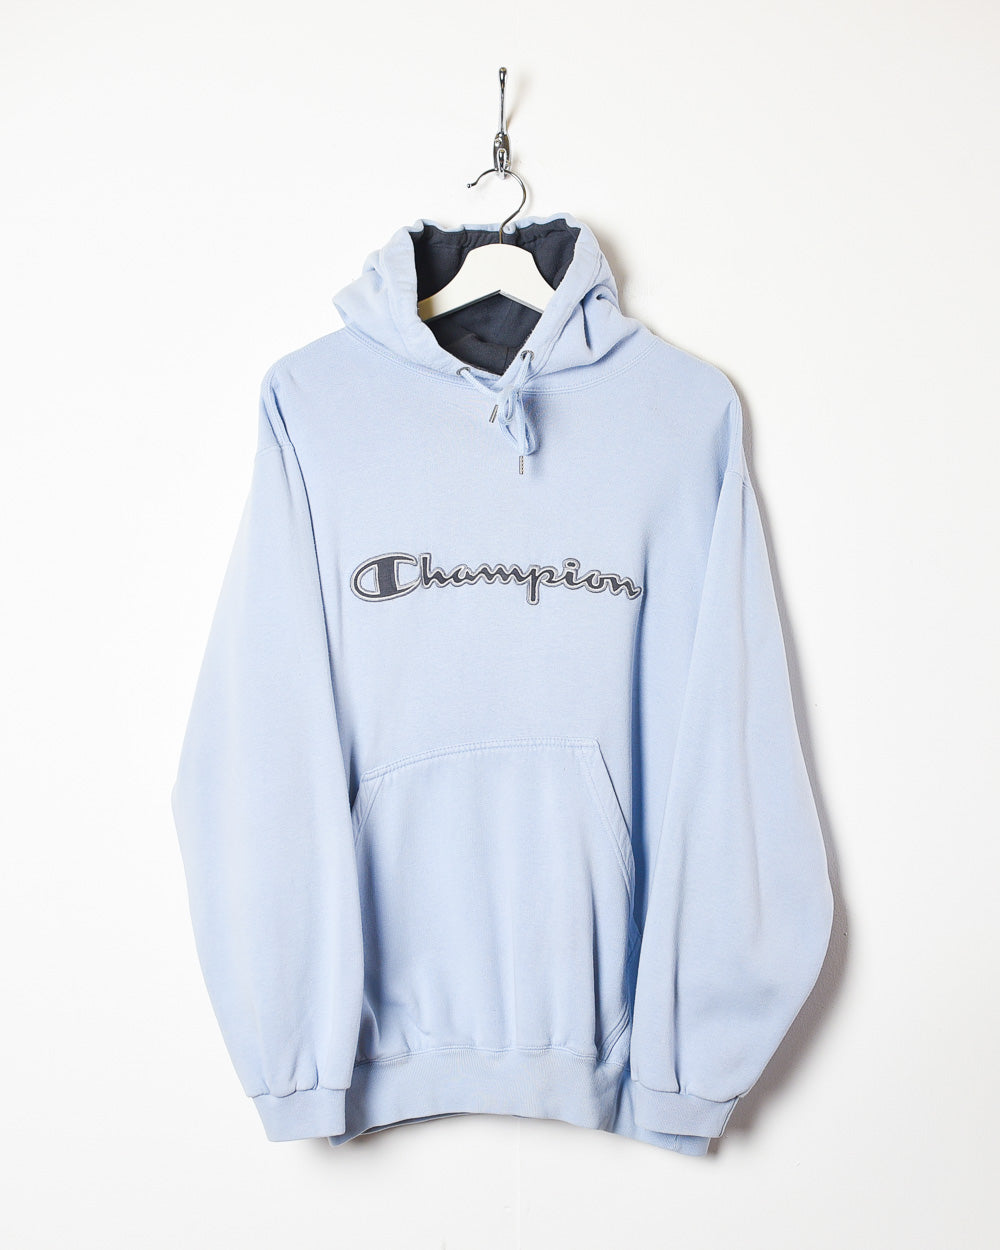 spell-out Champion Hoodie - Medium